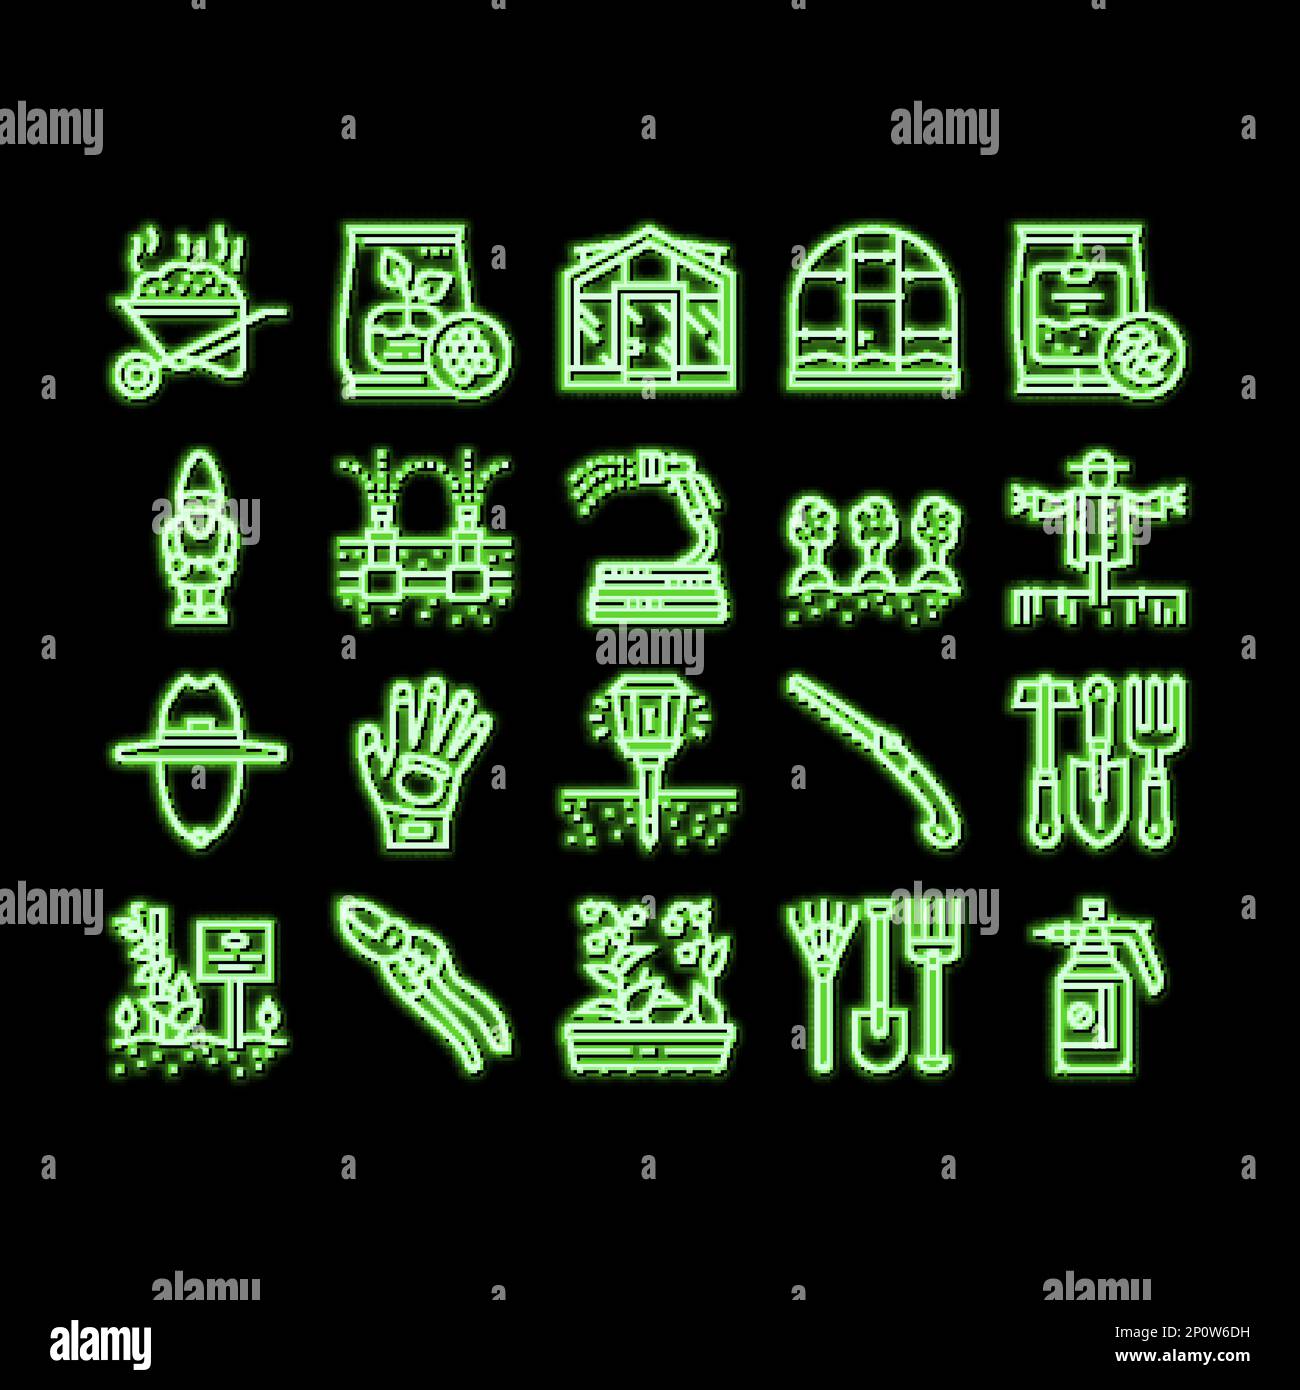 Set of neon garden tools and accessories icon Vector Image